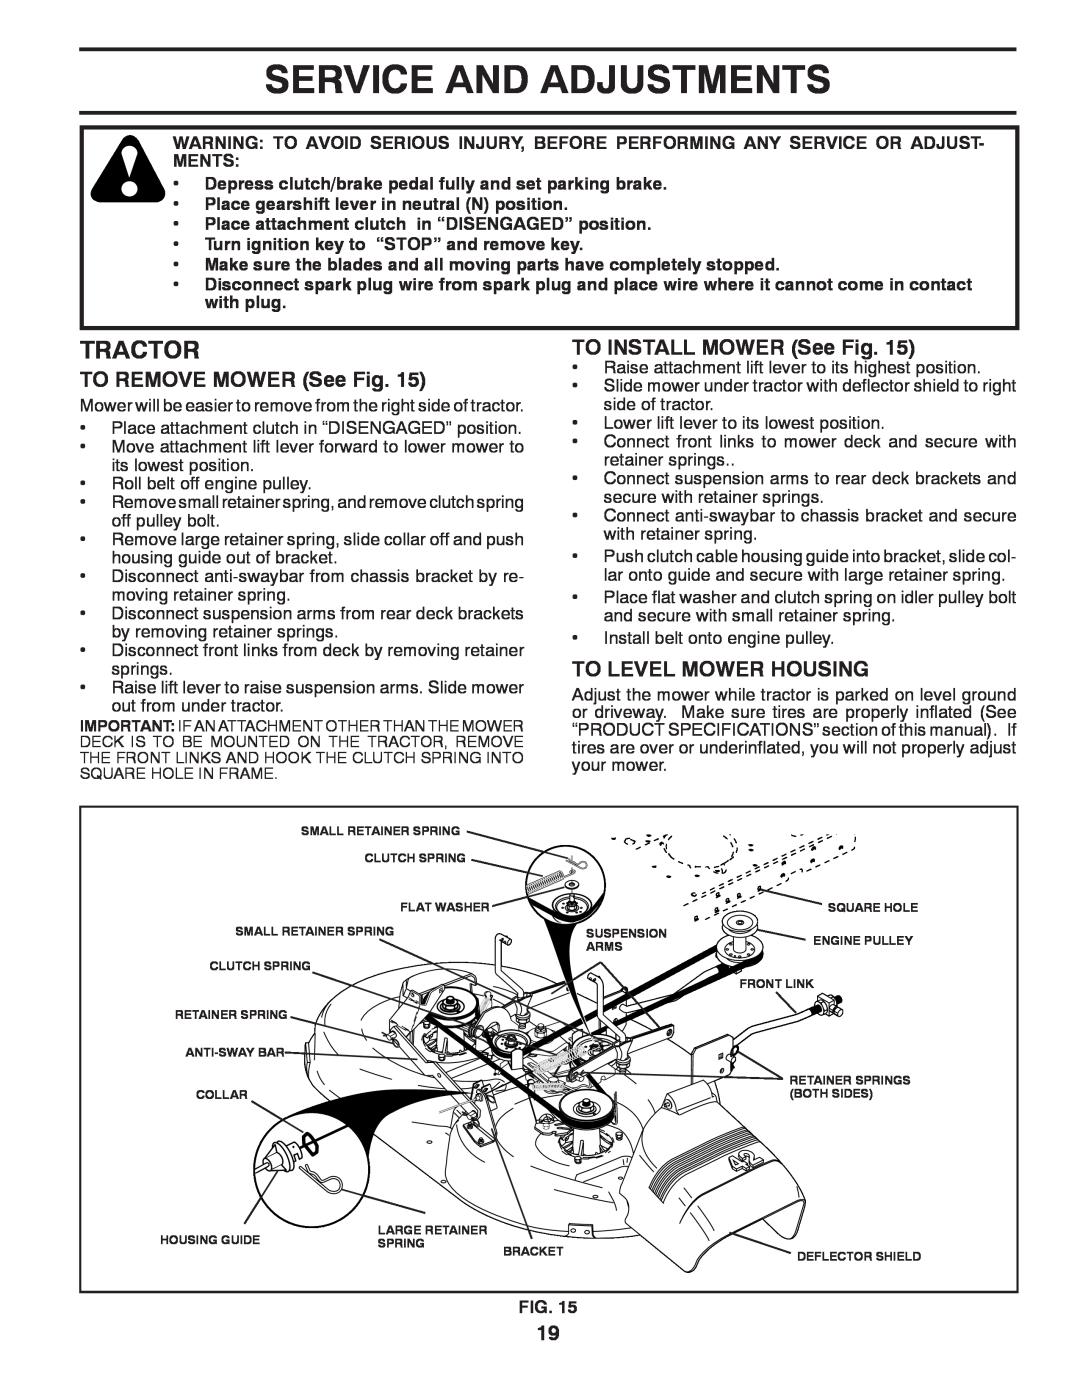 Poulan 418757 Service And Adjustments, TO REMOVE MOWER See Fig, TO INSTALL MOWER See Fig, To Level Mower Housing, Tractor 